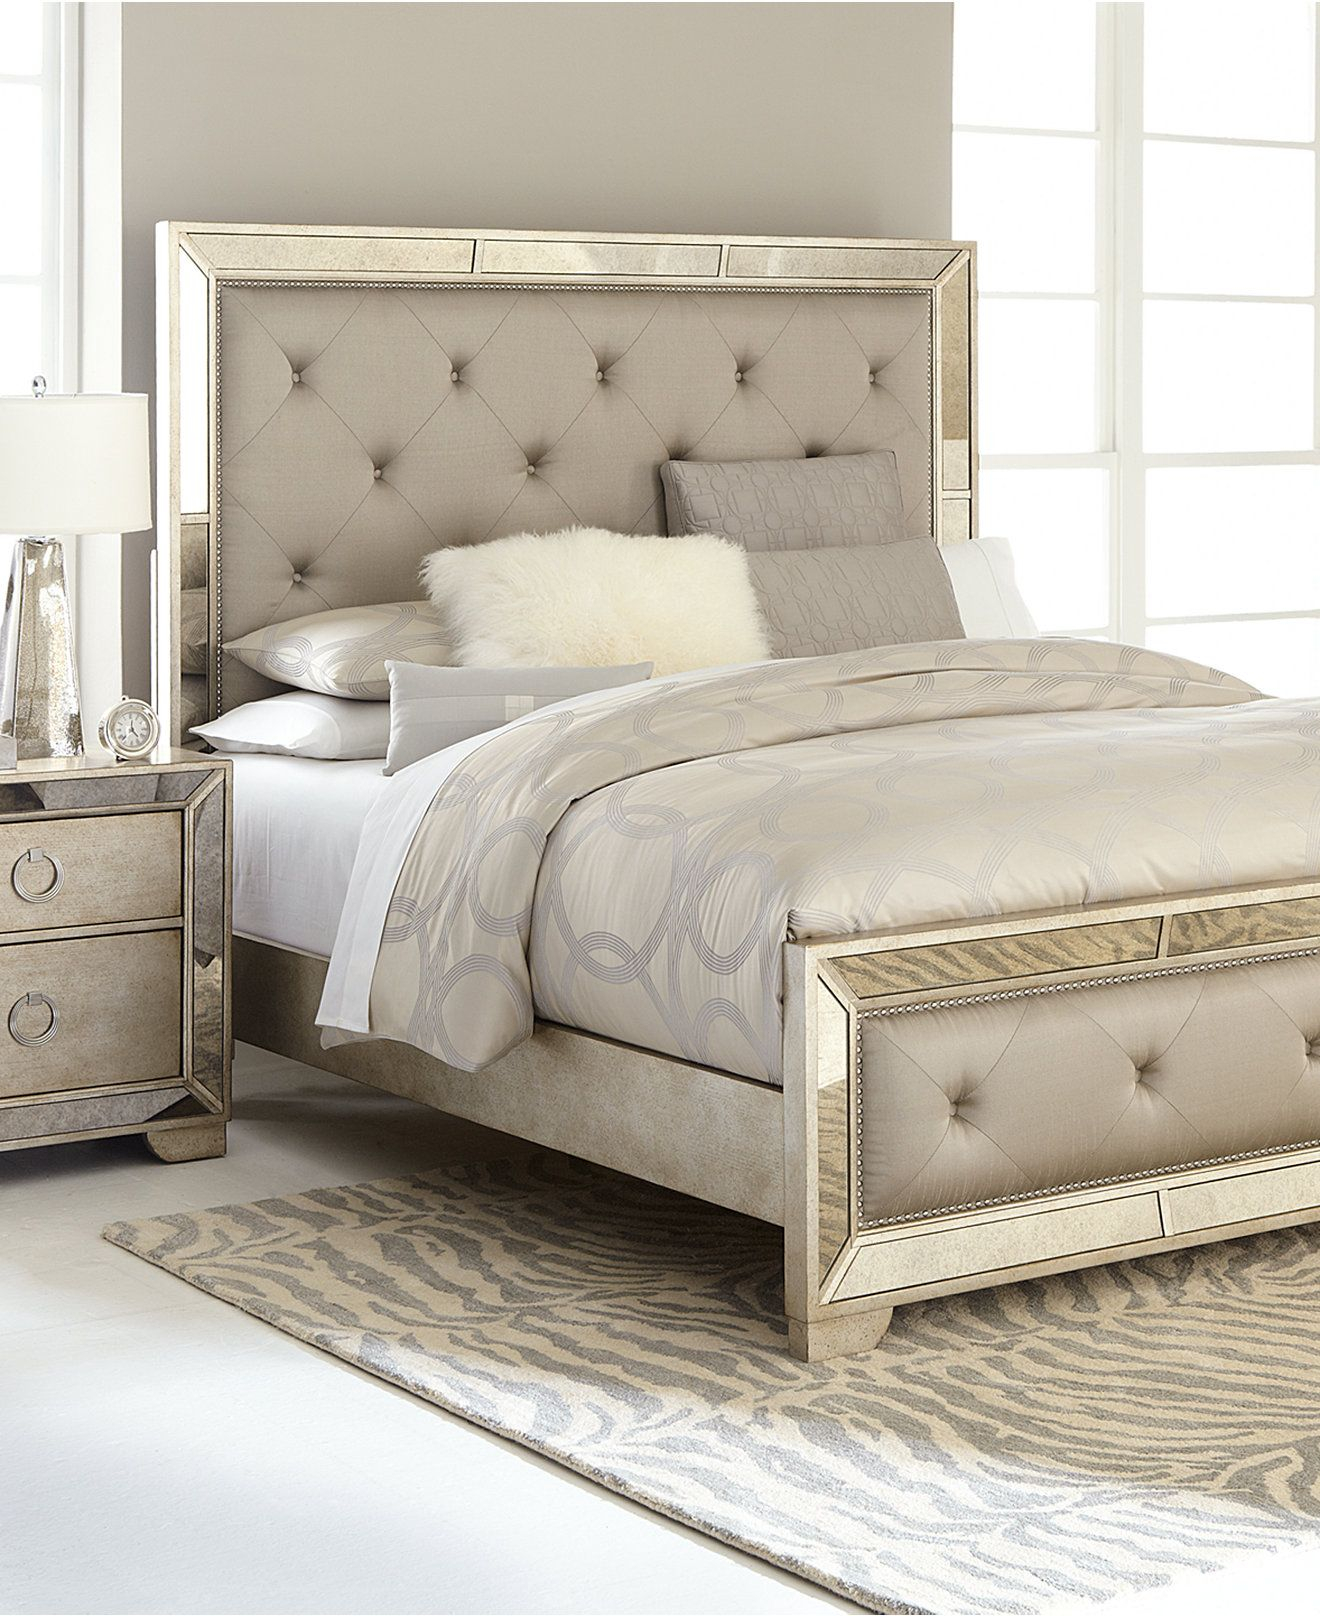 Ailey Bedroom Furniture Collection In 2019 My Dream Home with size 1320 X 1616